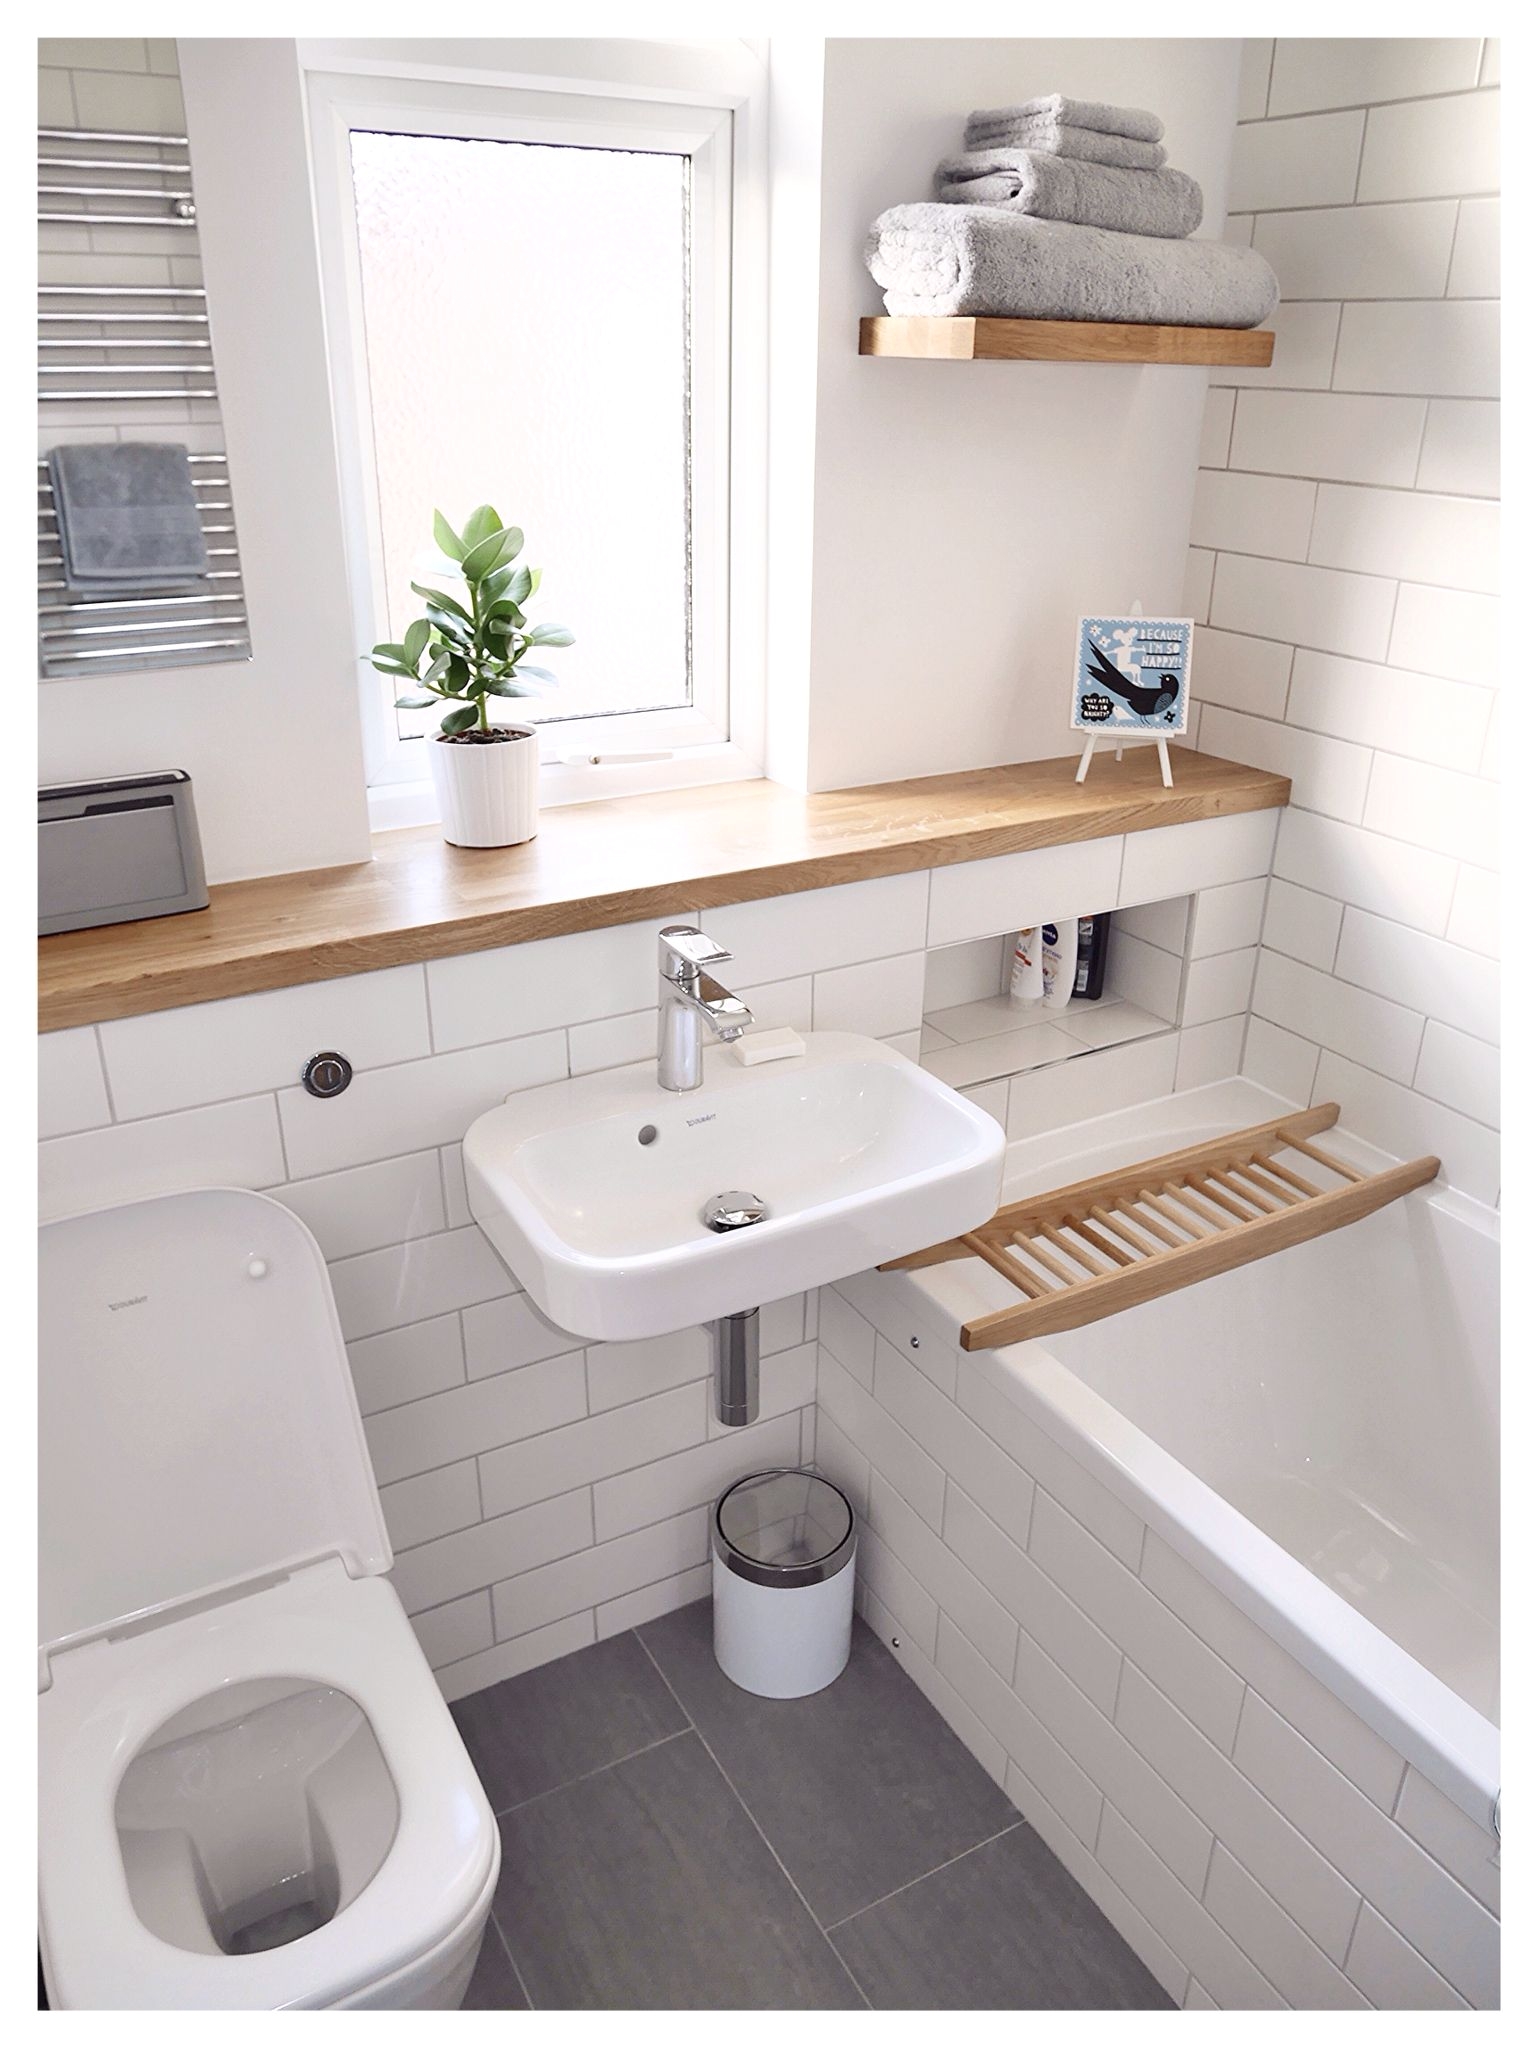 Optimise your space with these smart small bathroom ideas